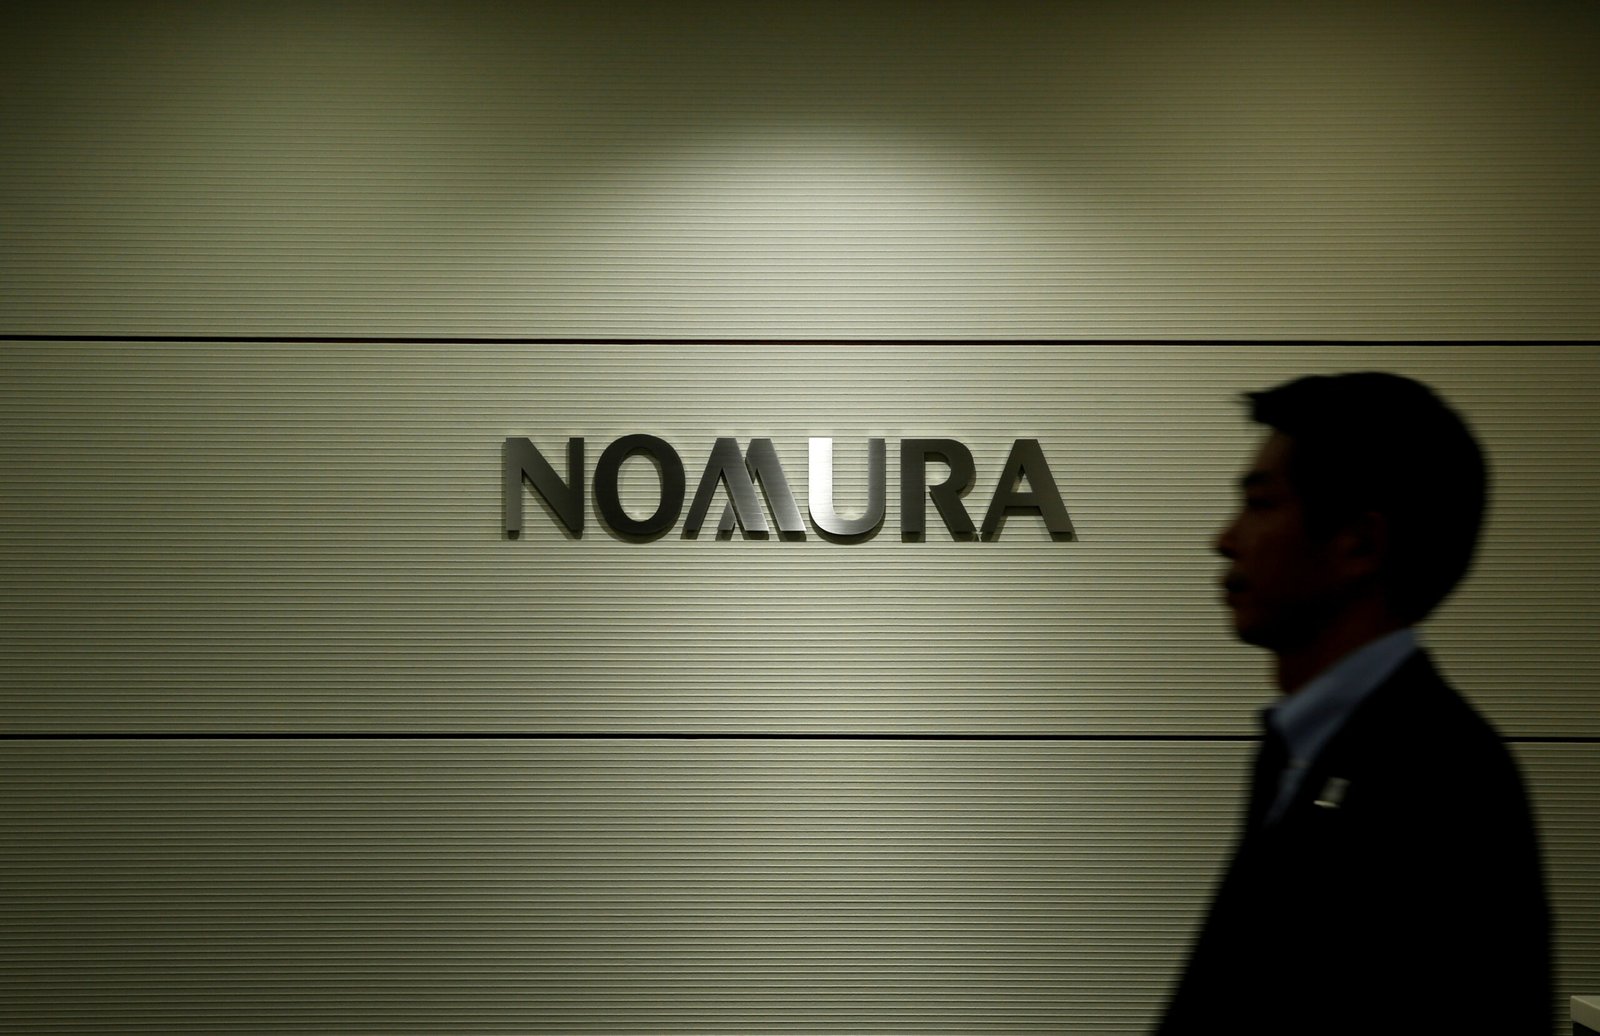 china-bans-nomura-senior-investment-banker-from-leaving-mainland-sources